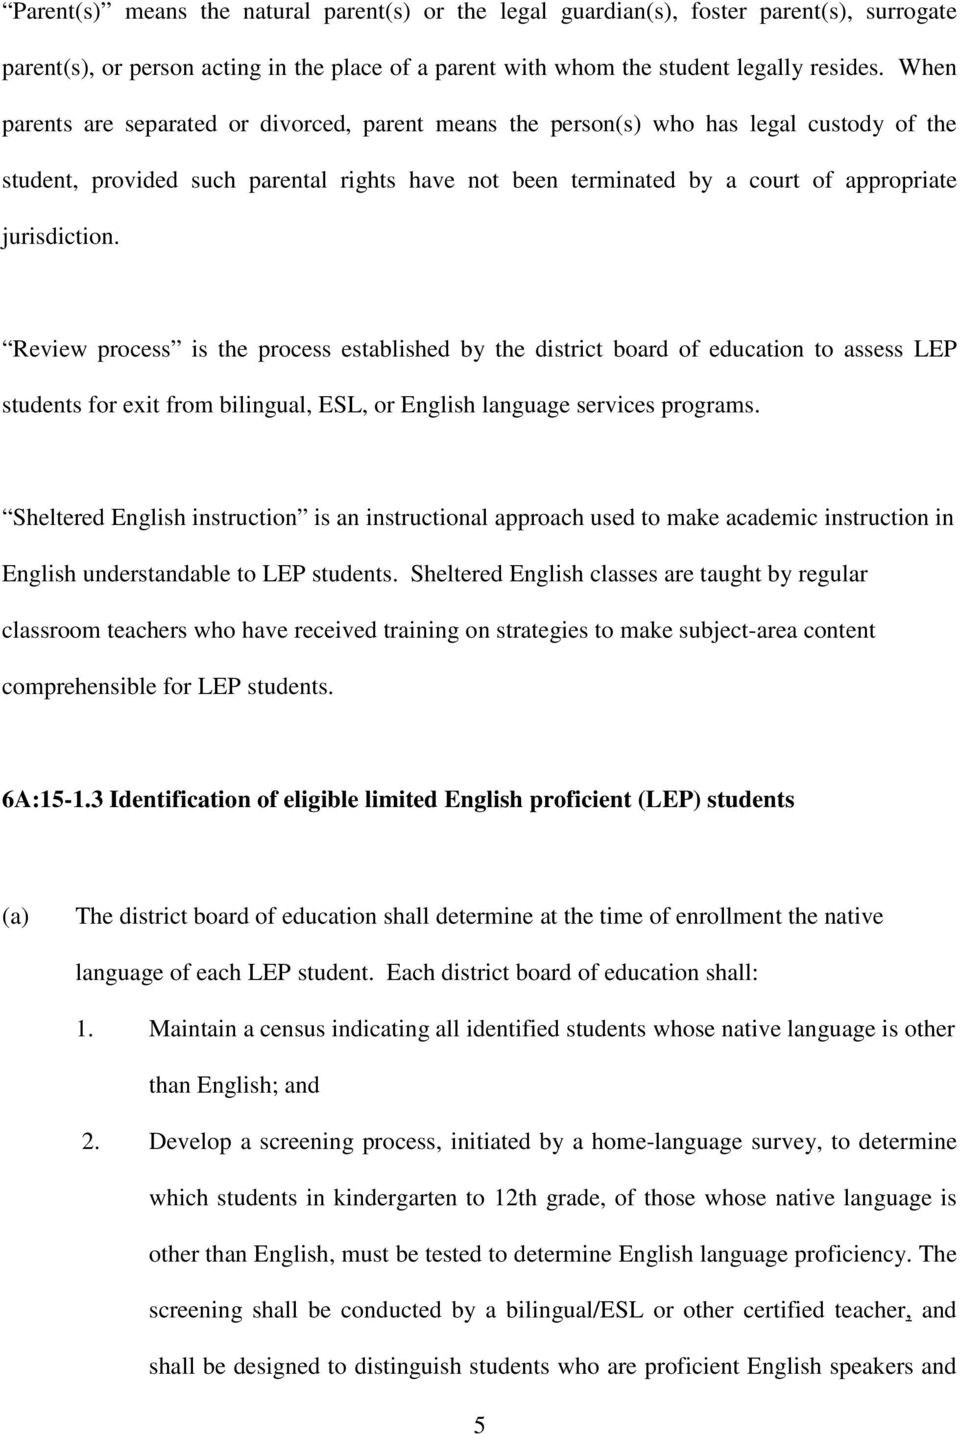 Review process is the process established by the district board of education to assess LEP students for exit from bilingual, ESL, or English language services programs.